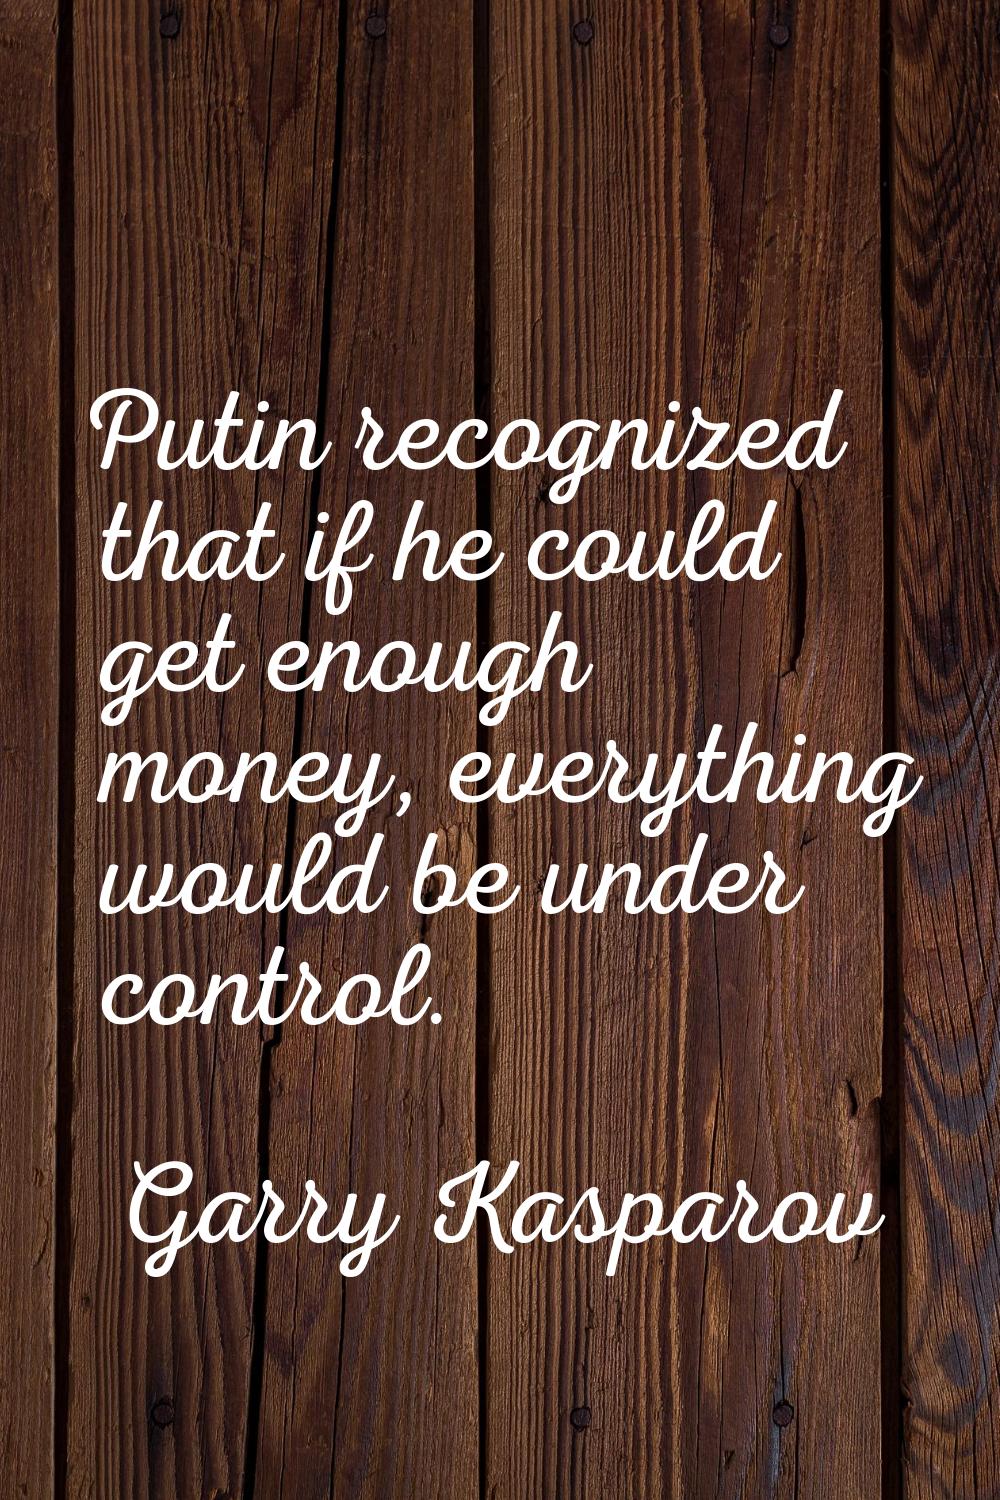 Putin recognized that if he could get enough money, everything would be under control.